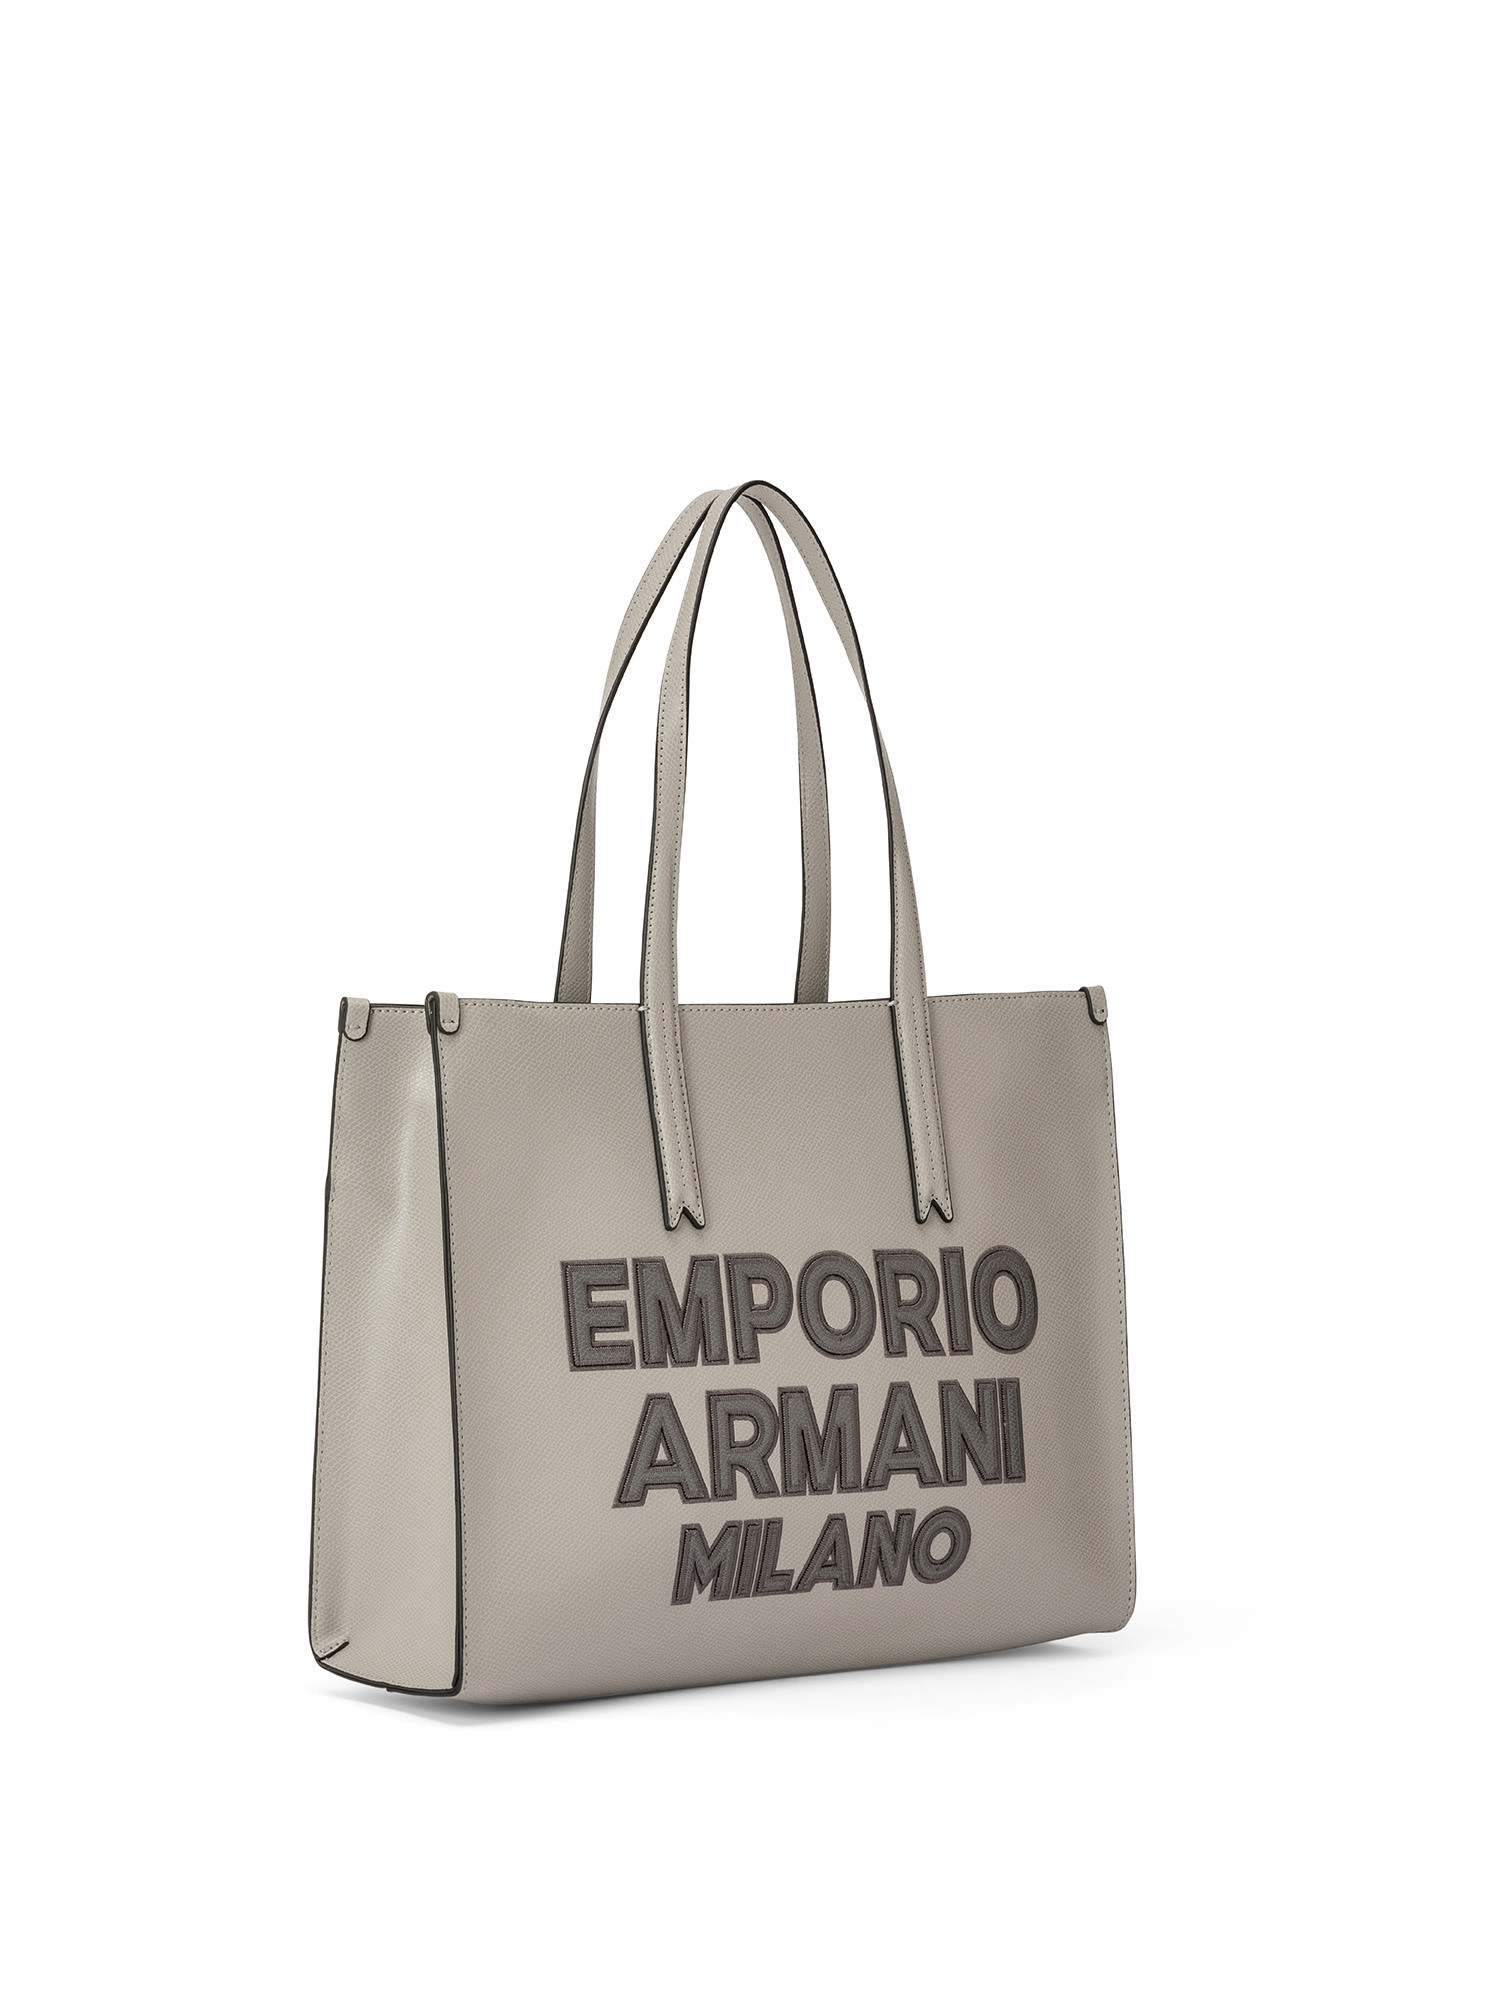 Emporio Armani - Bag with logo embroidery, Grey, large image number 1